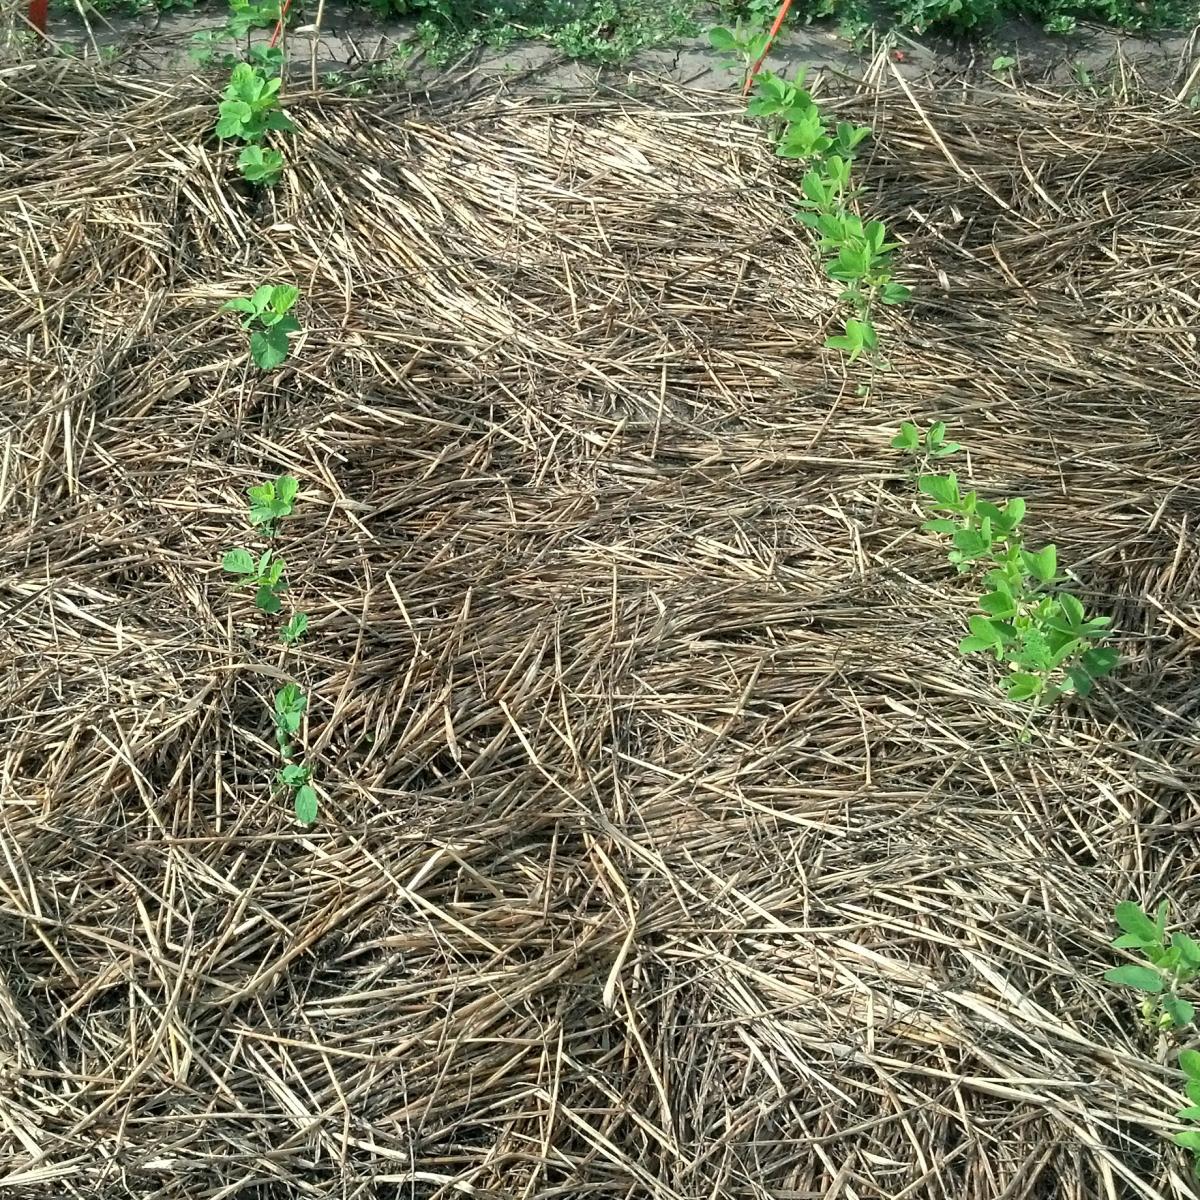 Cover crop residue can reduce or eliminate tillage in the garden and improve soil health.